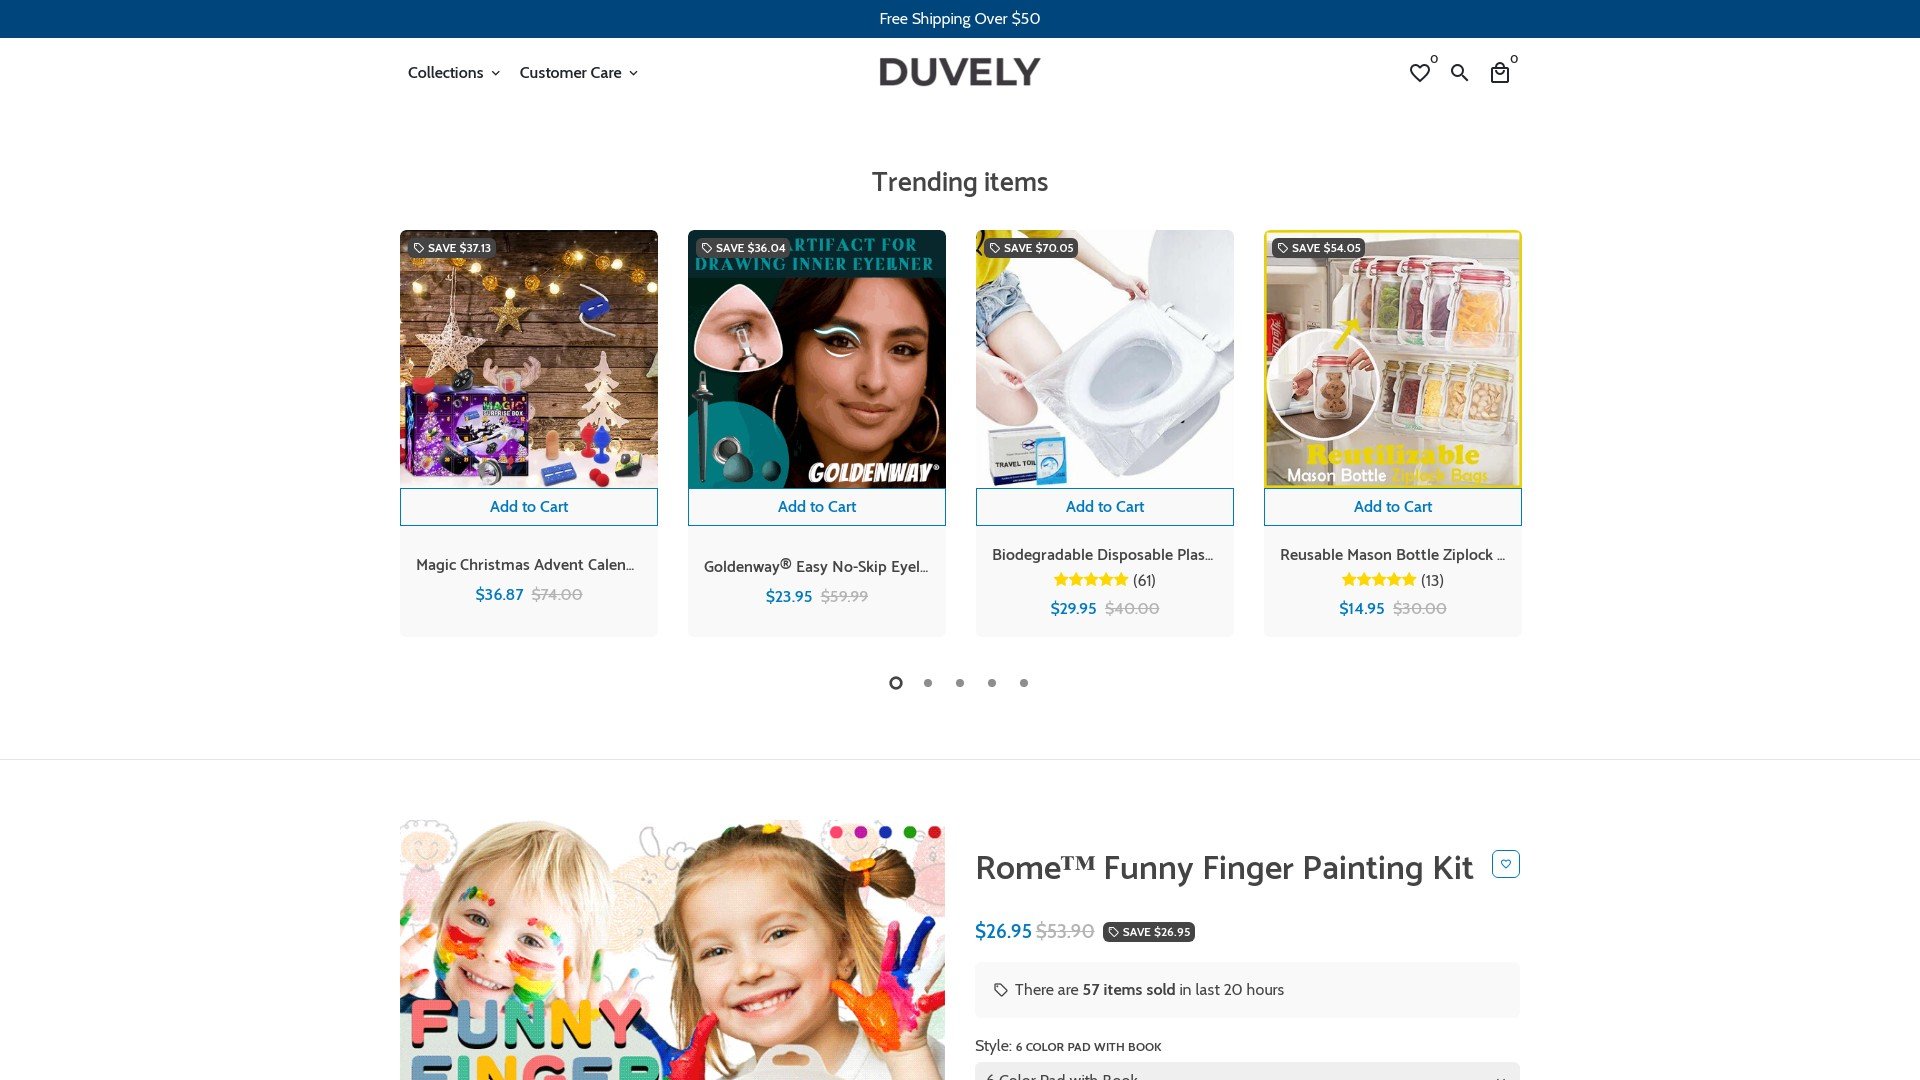 Theduvely at theduvely.com